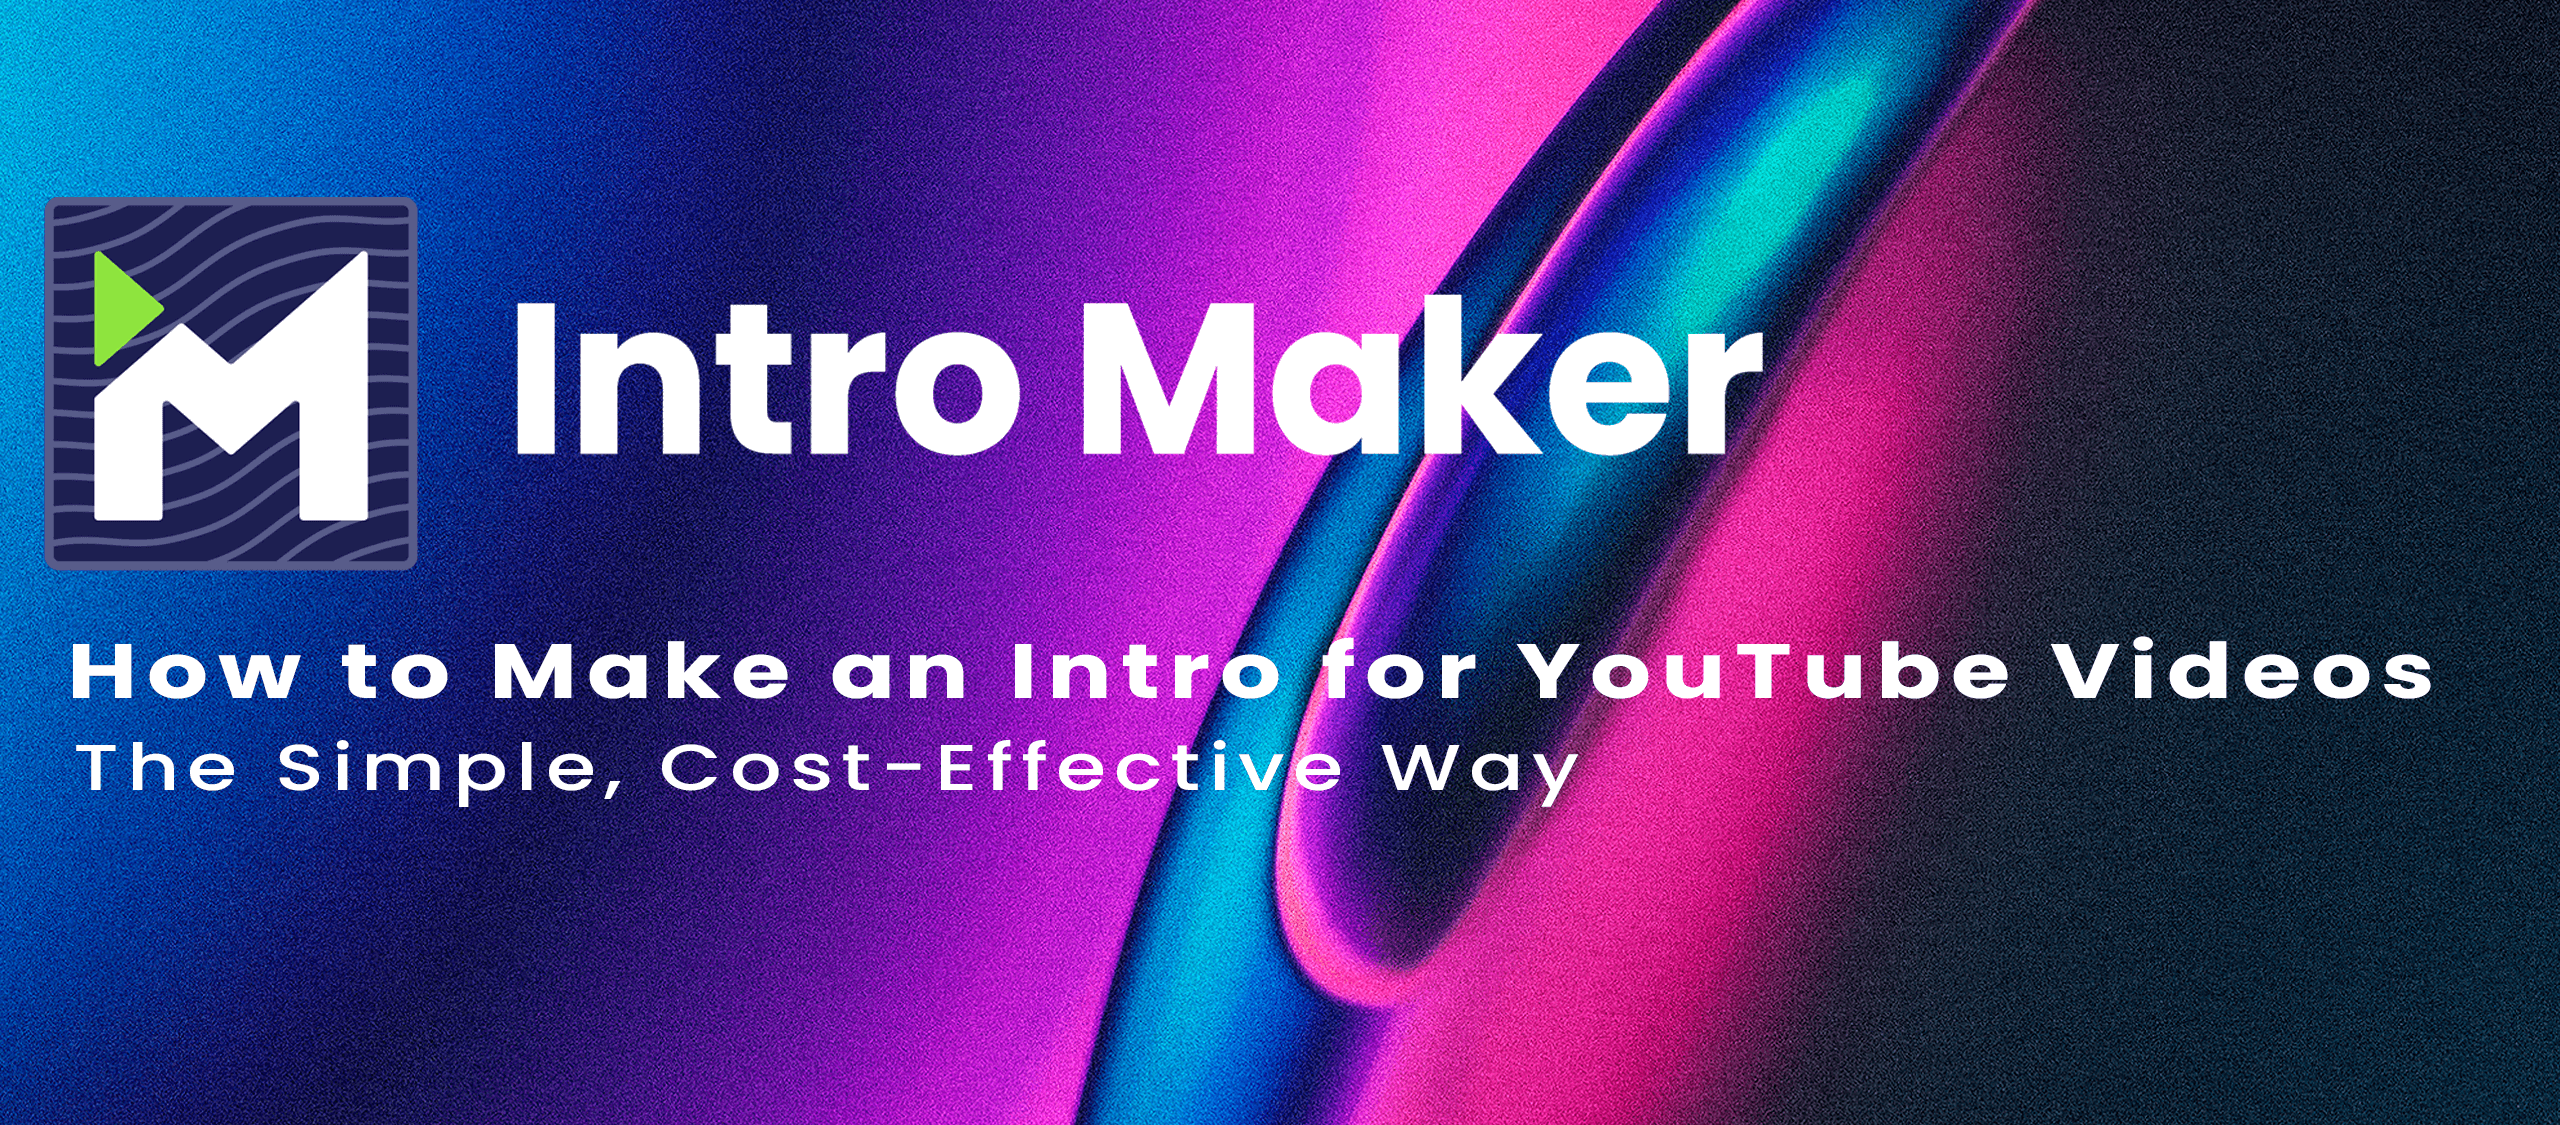 How to Make an Intro for YouTube Videos